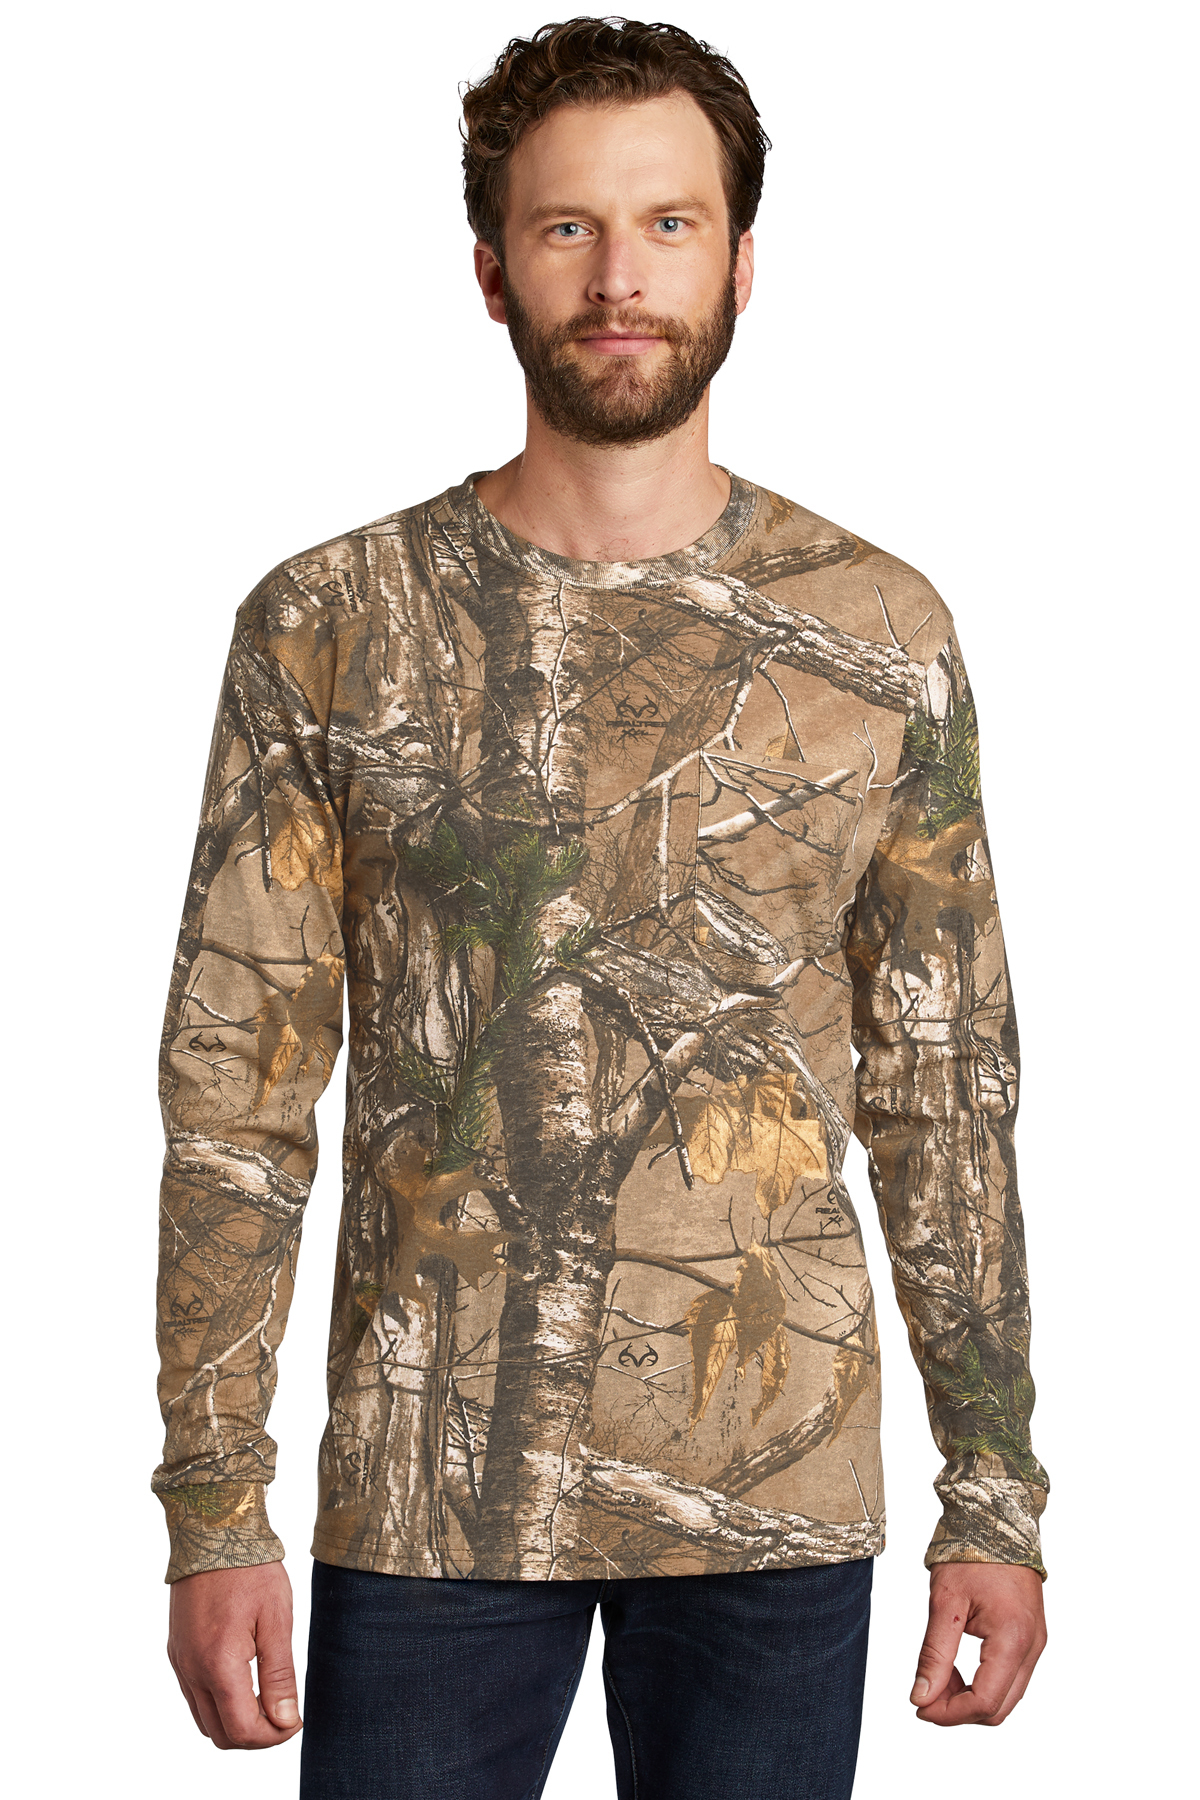 Russell Outdoors Realtree Long Sleeve Explorer 100% Cotton T